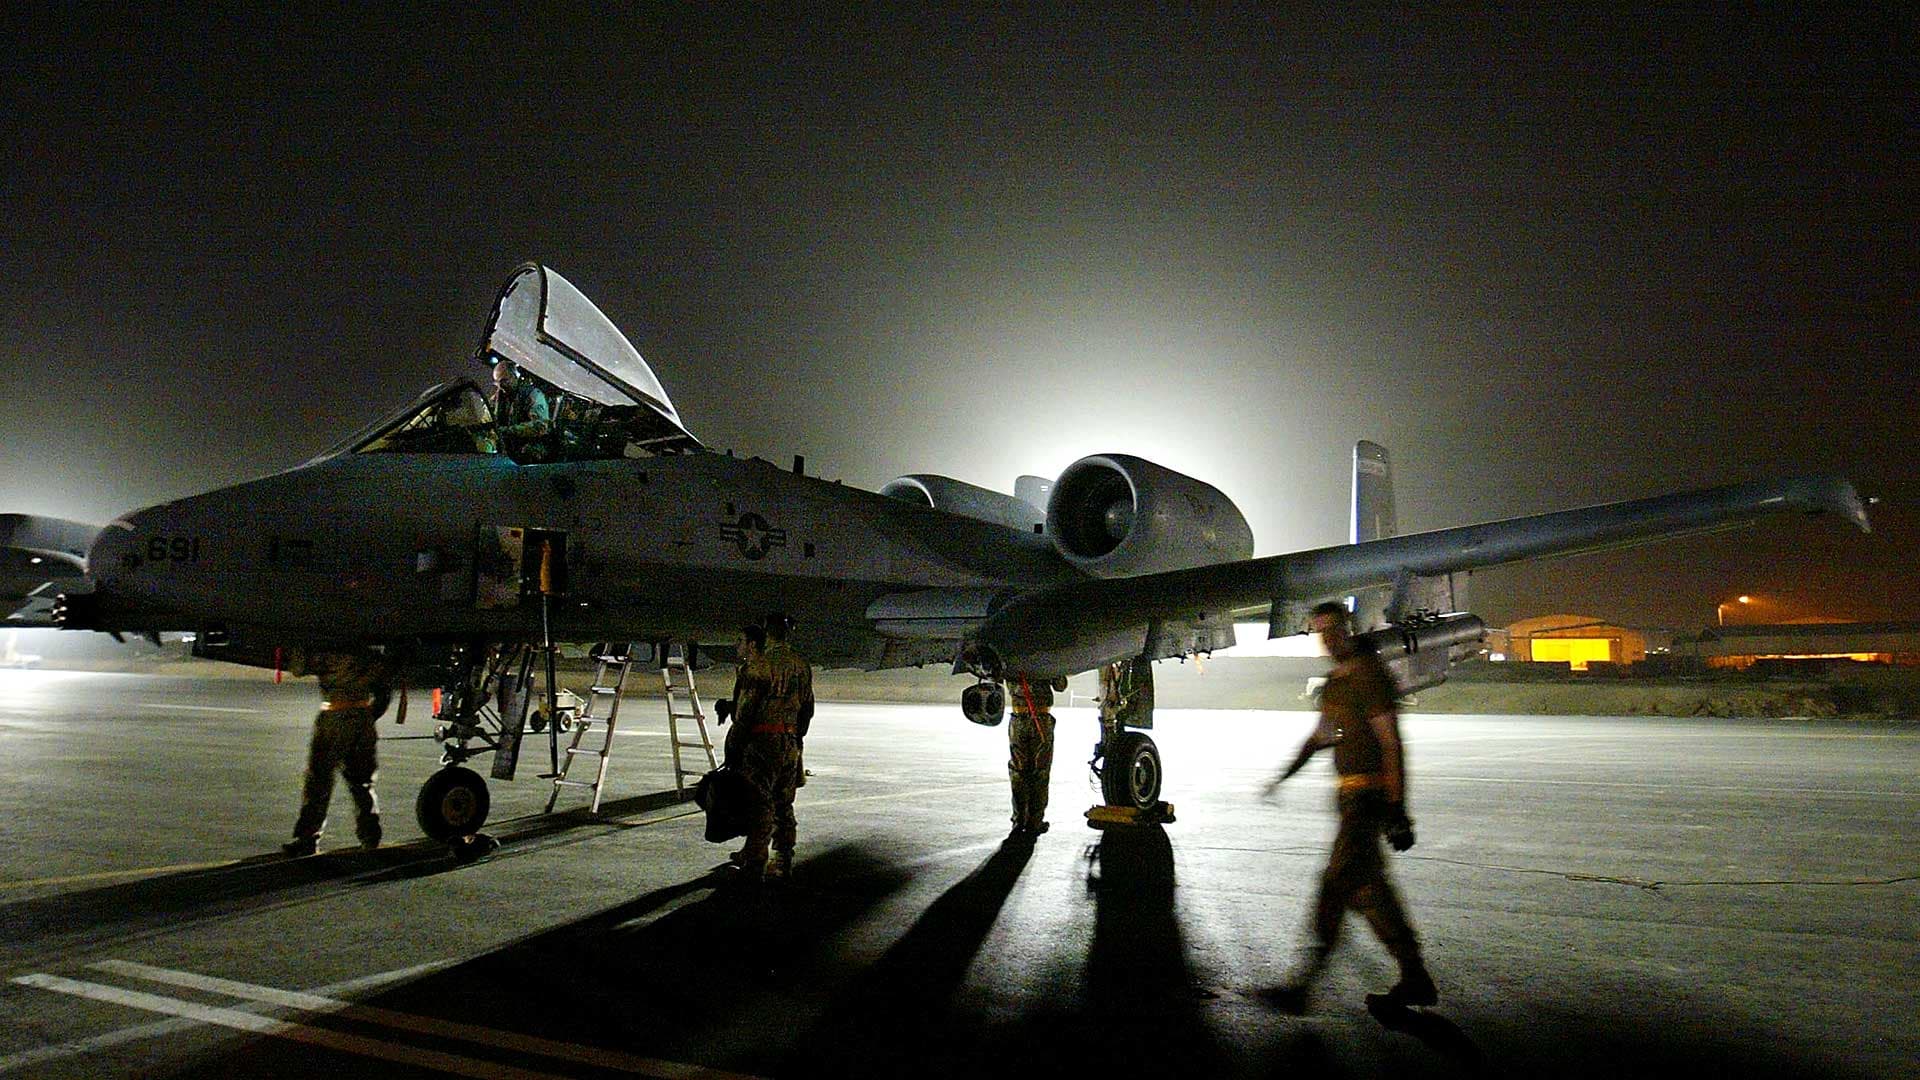 Air Force to Keep the A-10 Warthog Airborne